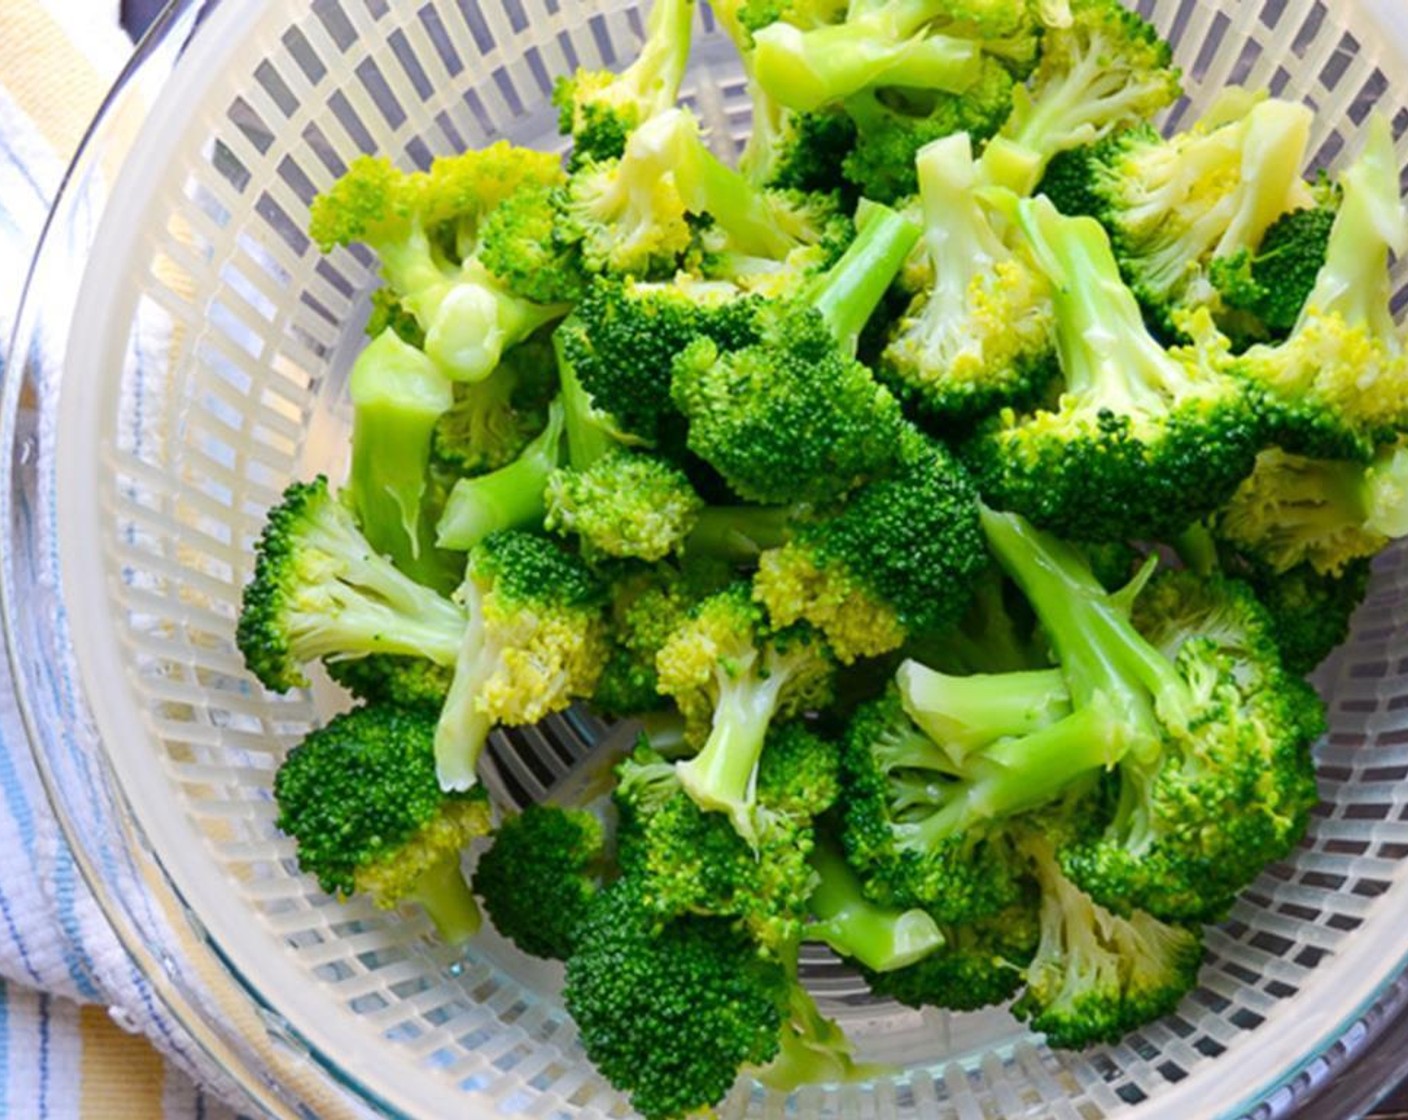 step 6 When broccoli is completely cool, transfer it to a colander and allow it to dry completely. When broccoli is dry, add Olive Oil (1/3 cup), Sea Salt (1/2 tsp), and Ground Black Pepper (1/2 tsp) and toss to coat.